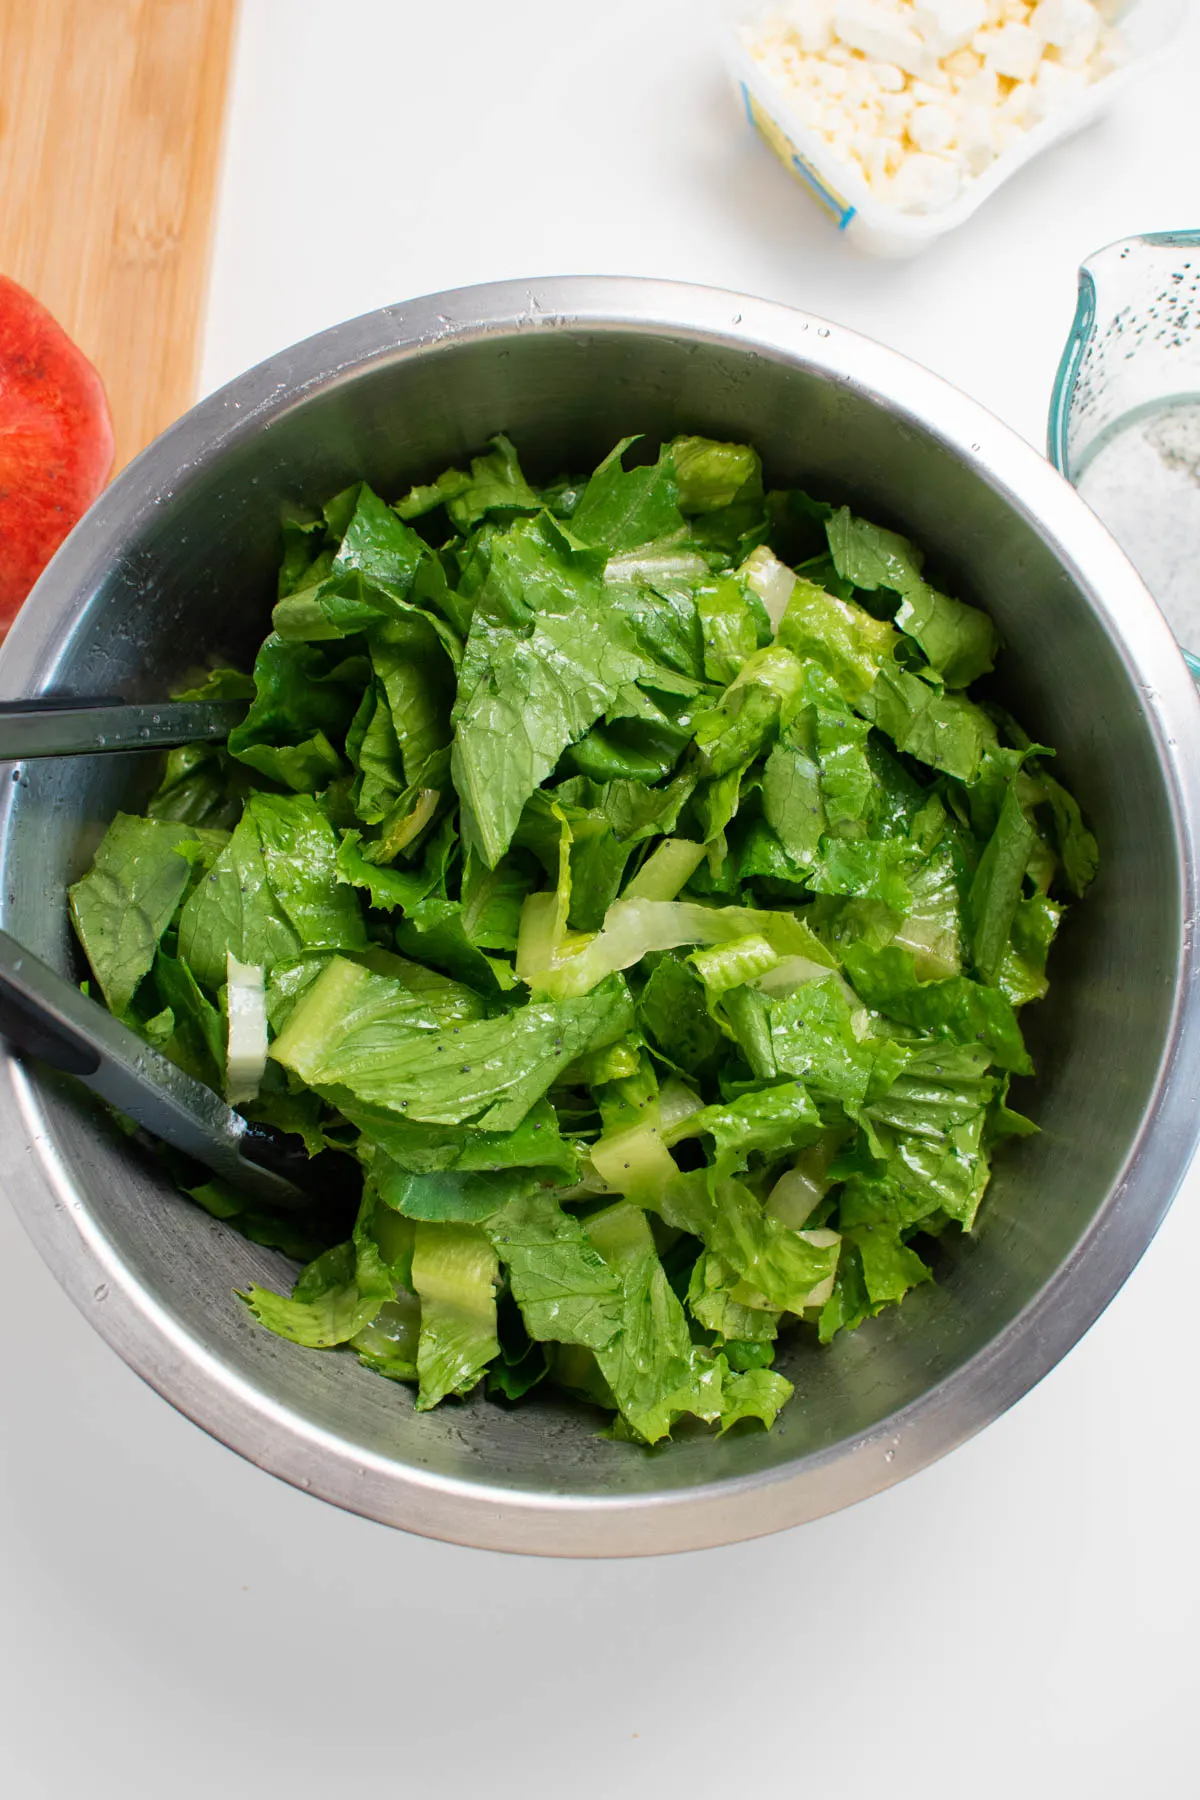 Chopped lettuce coated in poppy seed dressing in large salad bowl with tongs.